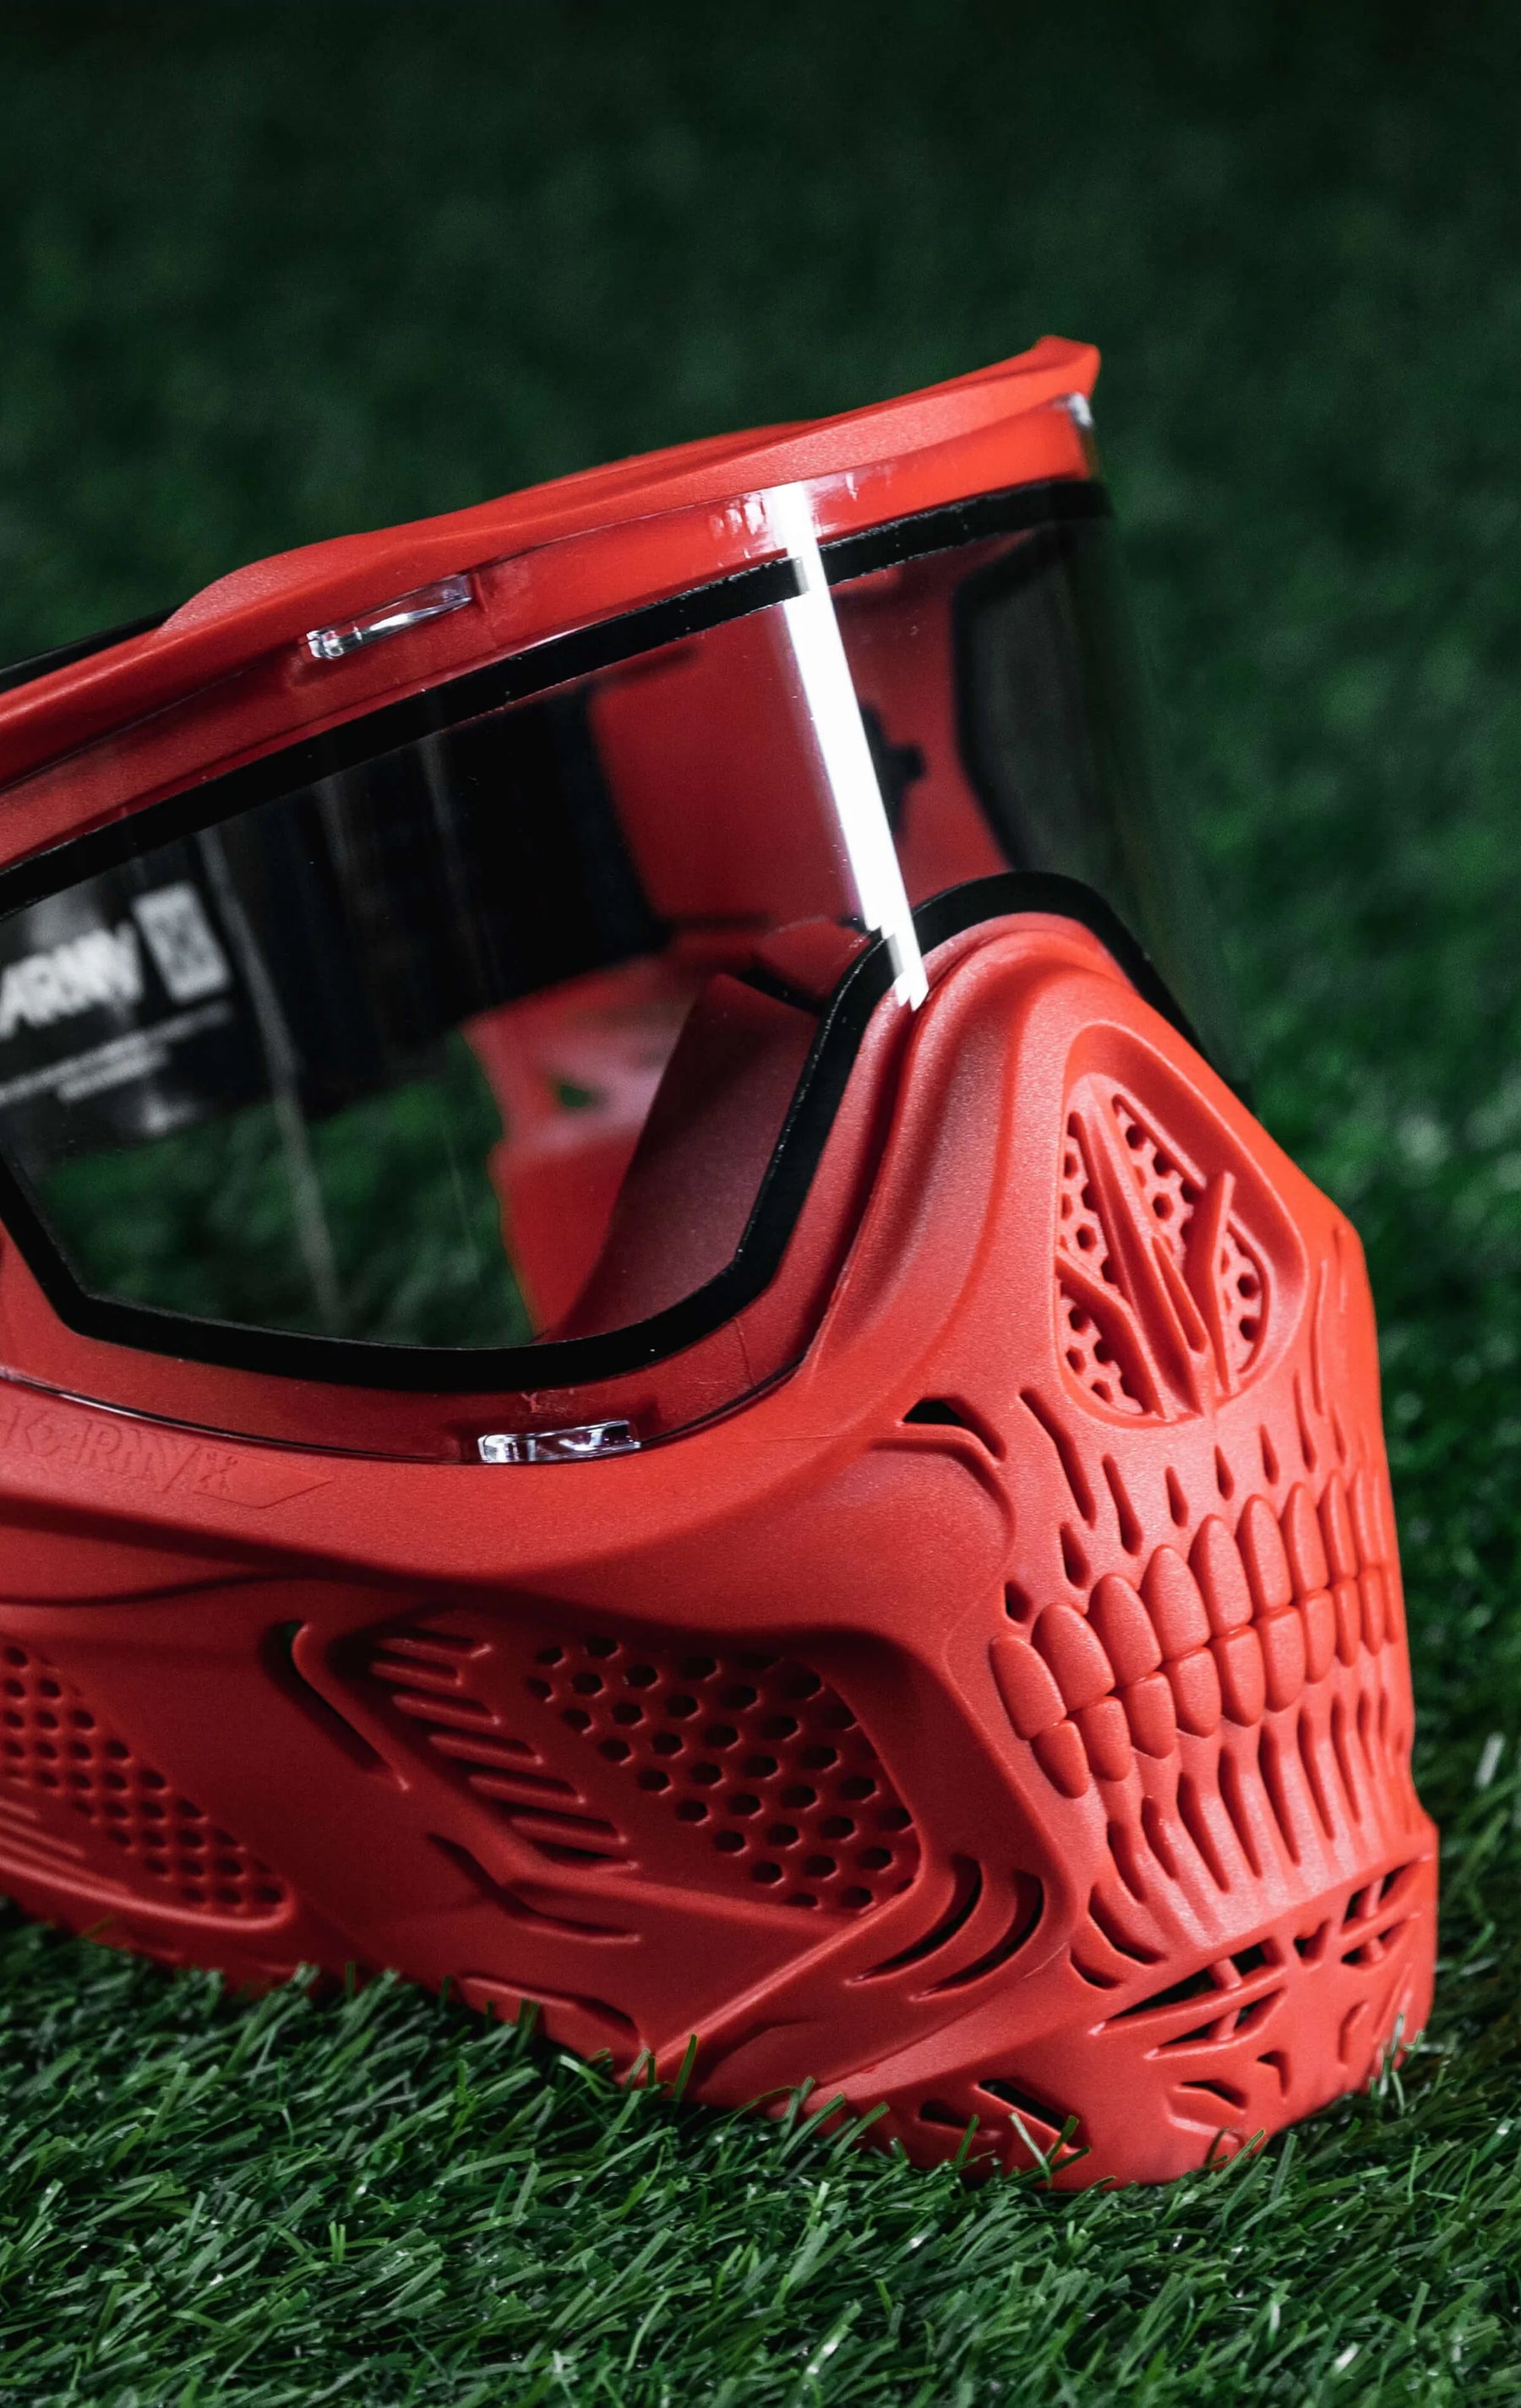 Hstl Skull Goggle - Red W/ Clear Lens | Paintball Goggle | Mask | Hk Army